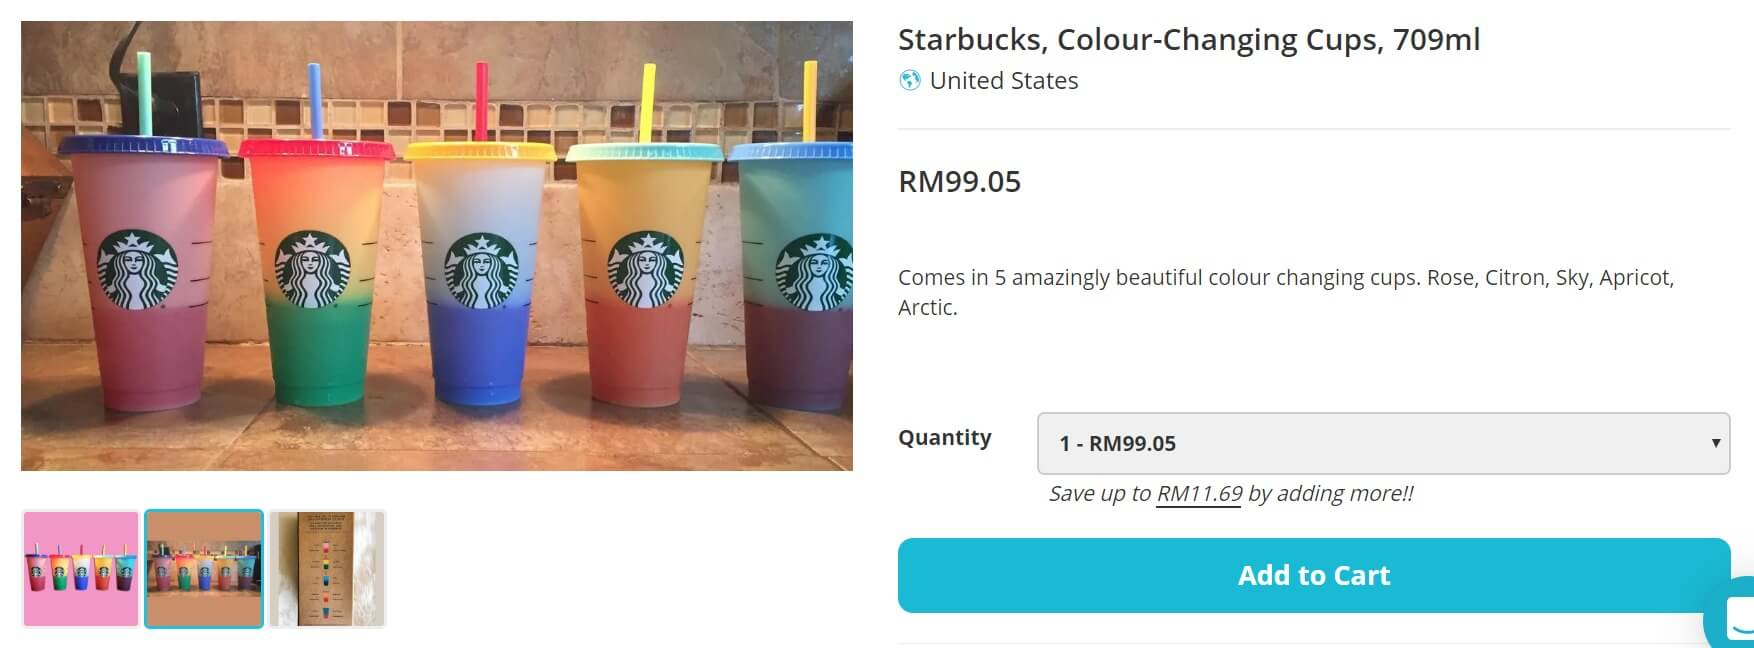 Starbucks US Just Released These Colourful Temperature-Sensitive Tumblers & They're Selling Out Like Crazy! - WORLD OF BUZZ